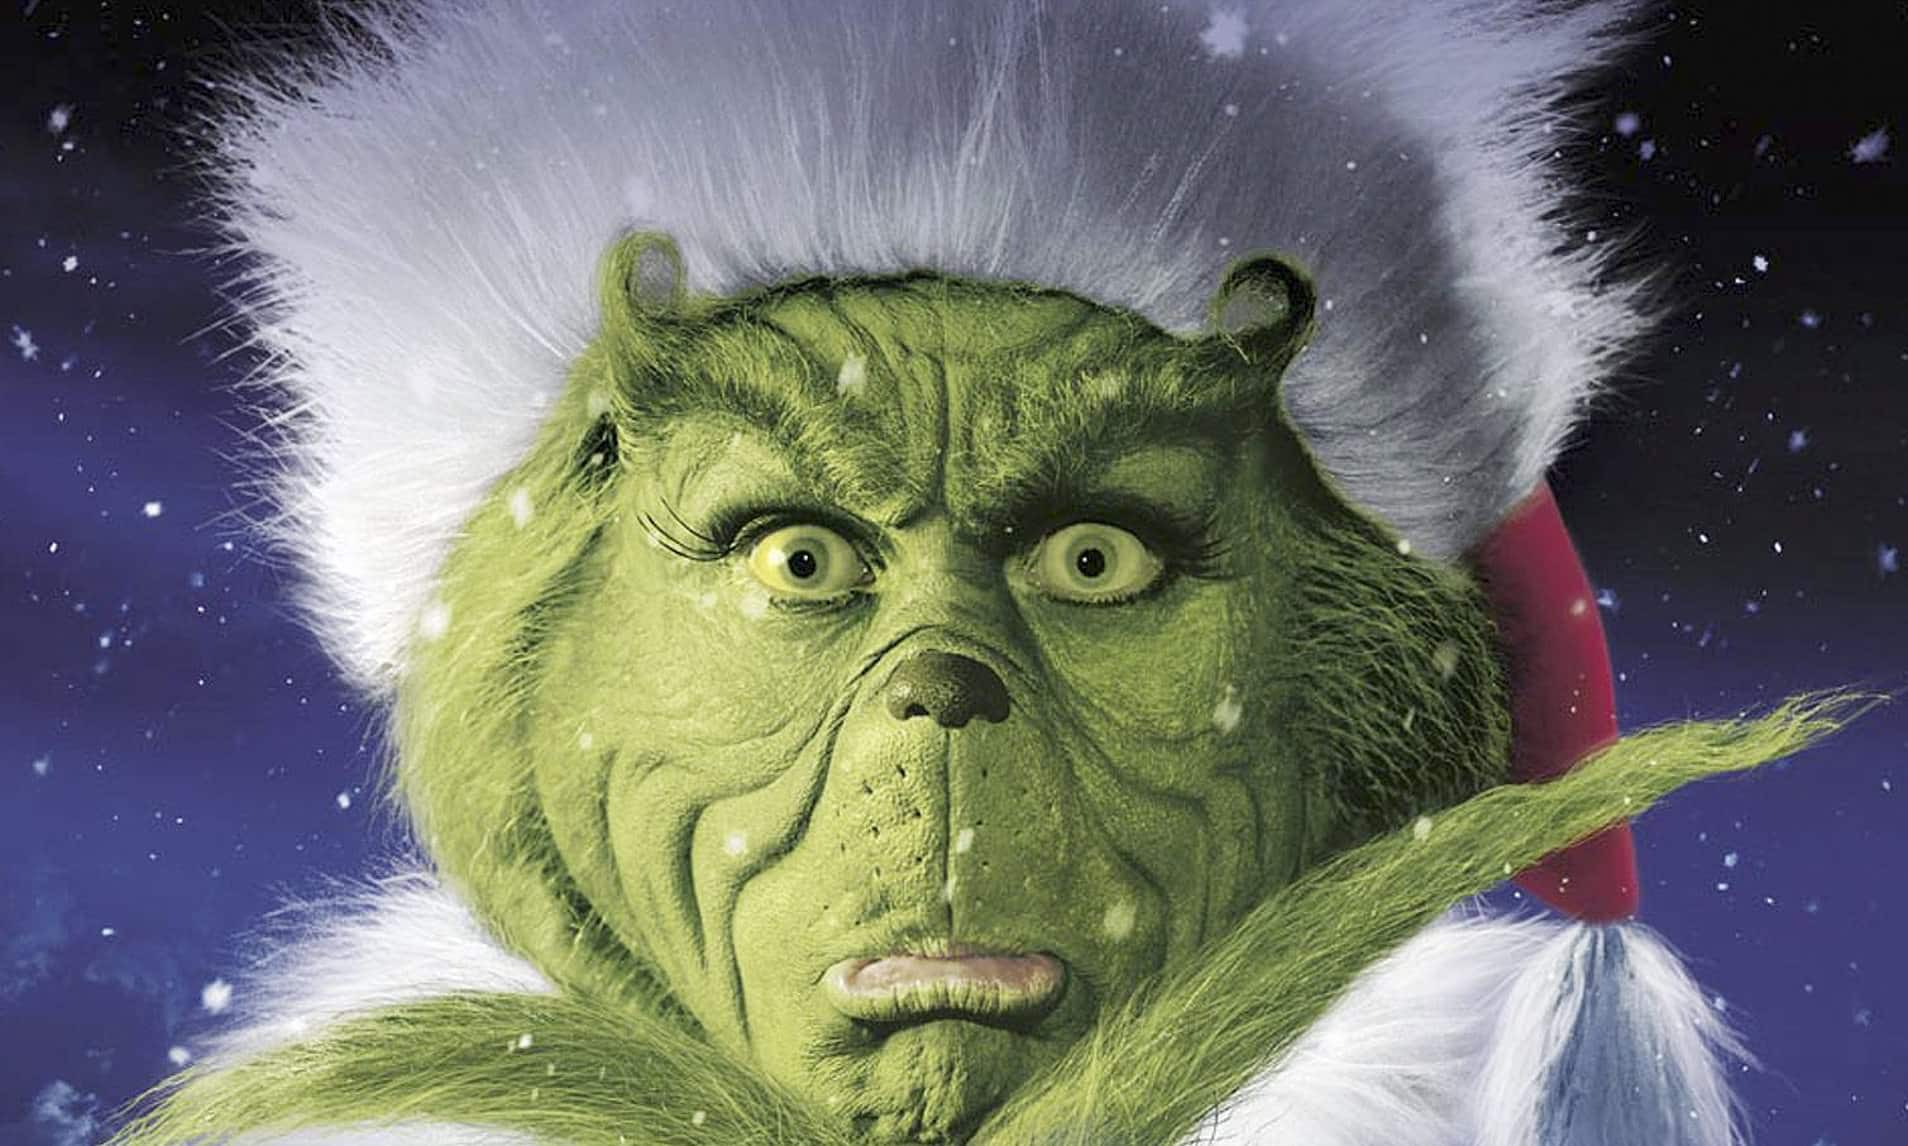 How The Grinch Stole Christmas deserves the title of Incredible Holiday Movie